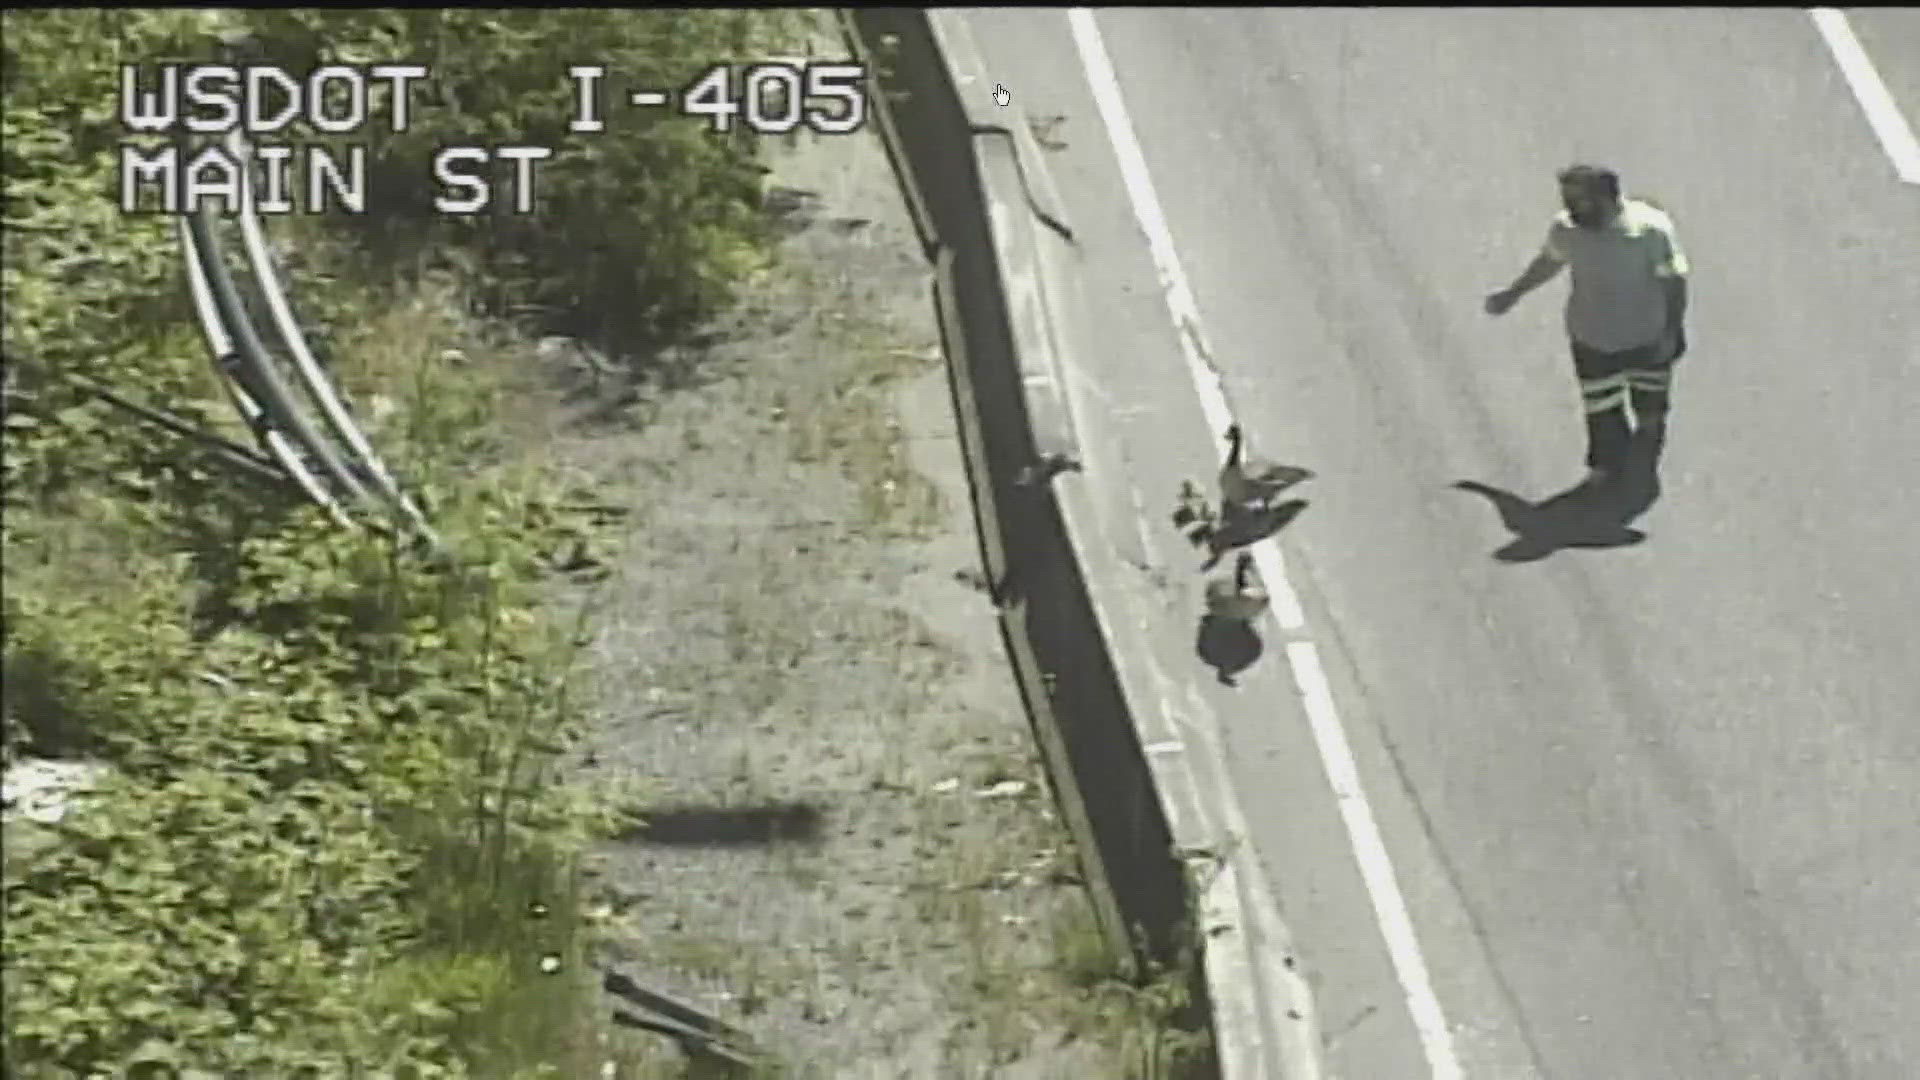 The geese were spotted on I-405 near SE 8th Street in Bellevue.